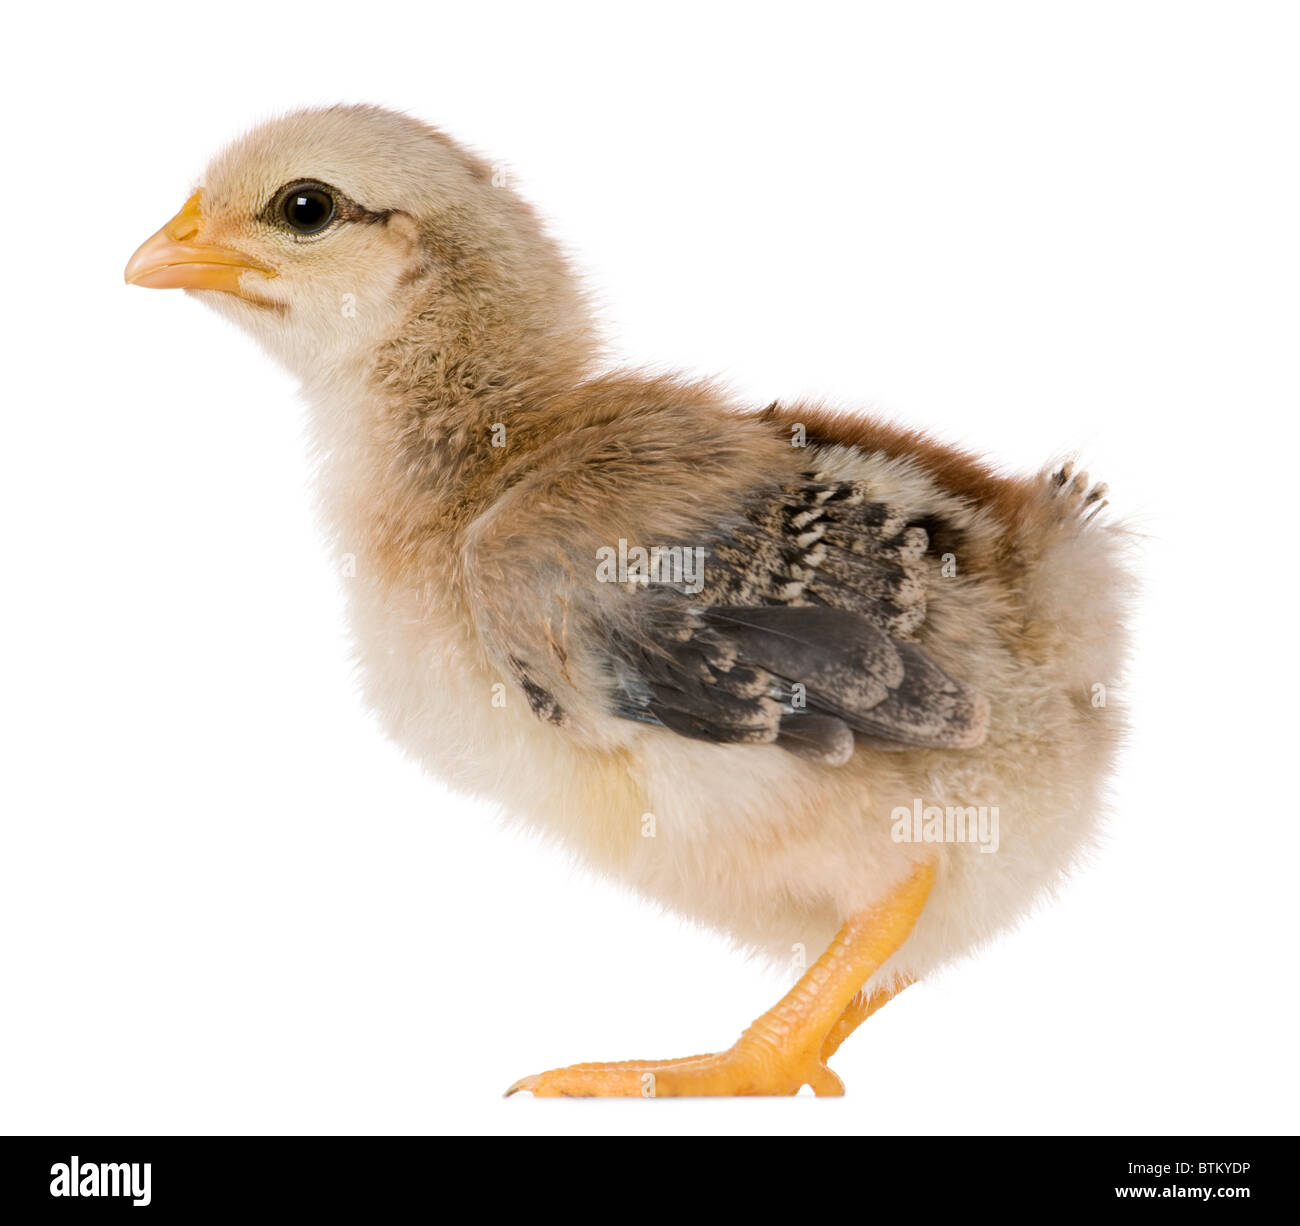 Chick, 15 jours in front of white background Banque D'Images